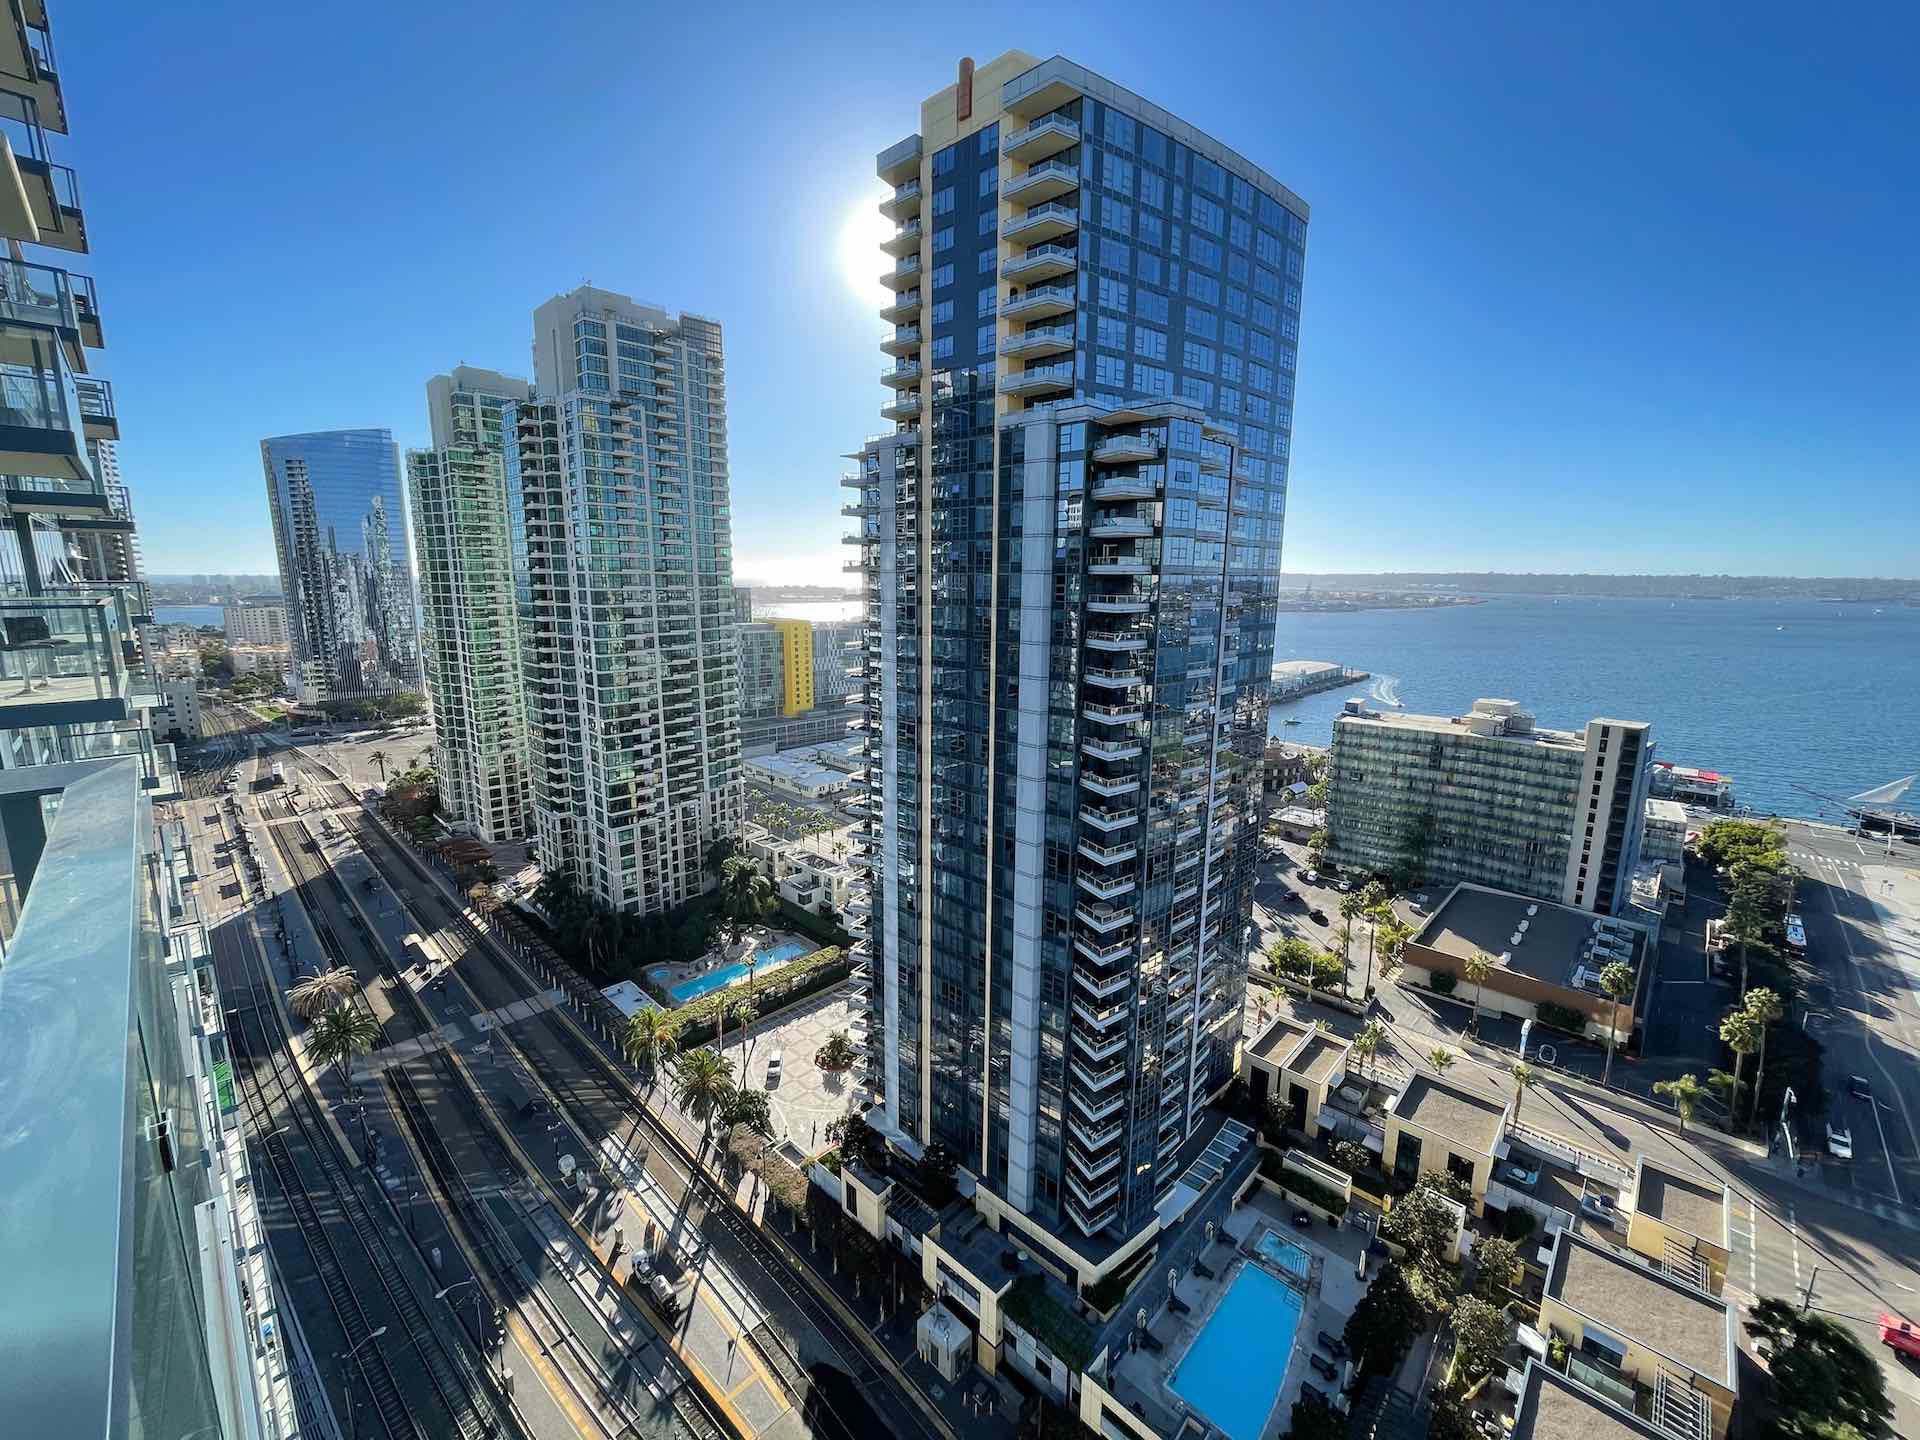 Luxury condo towers in San Diego Columbia District